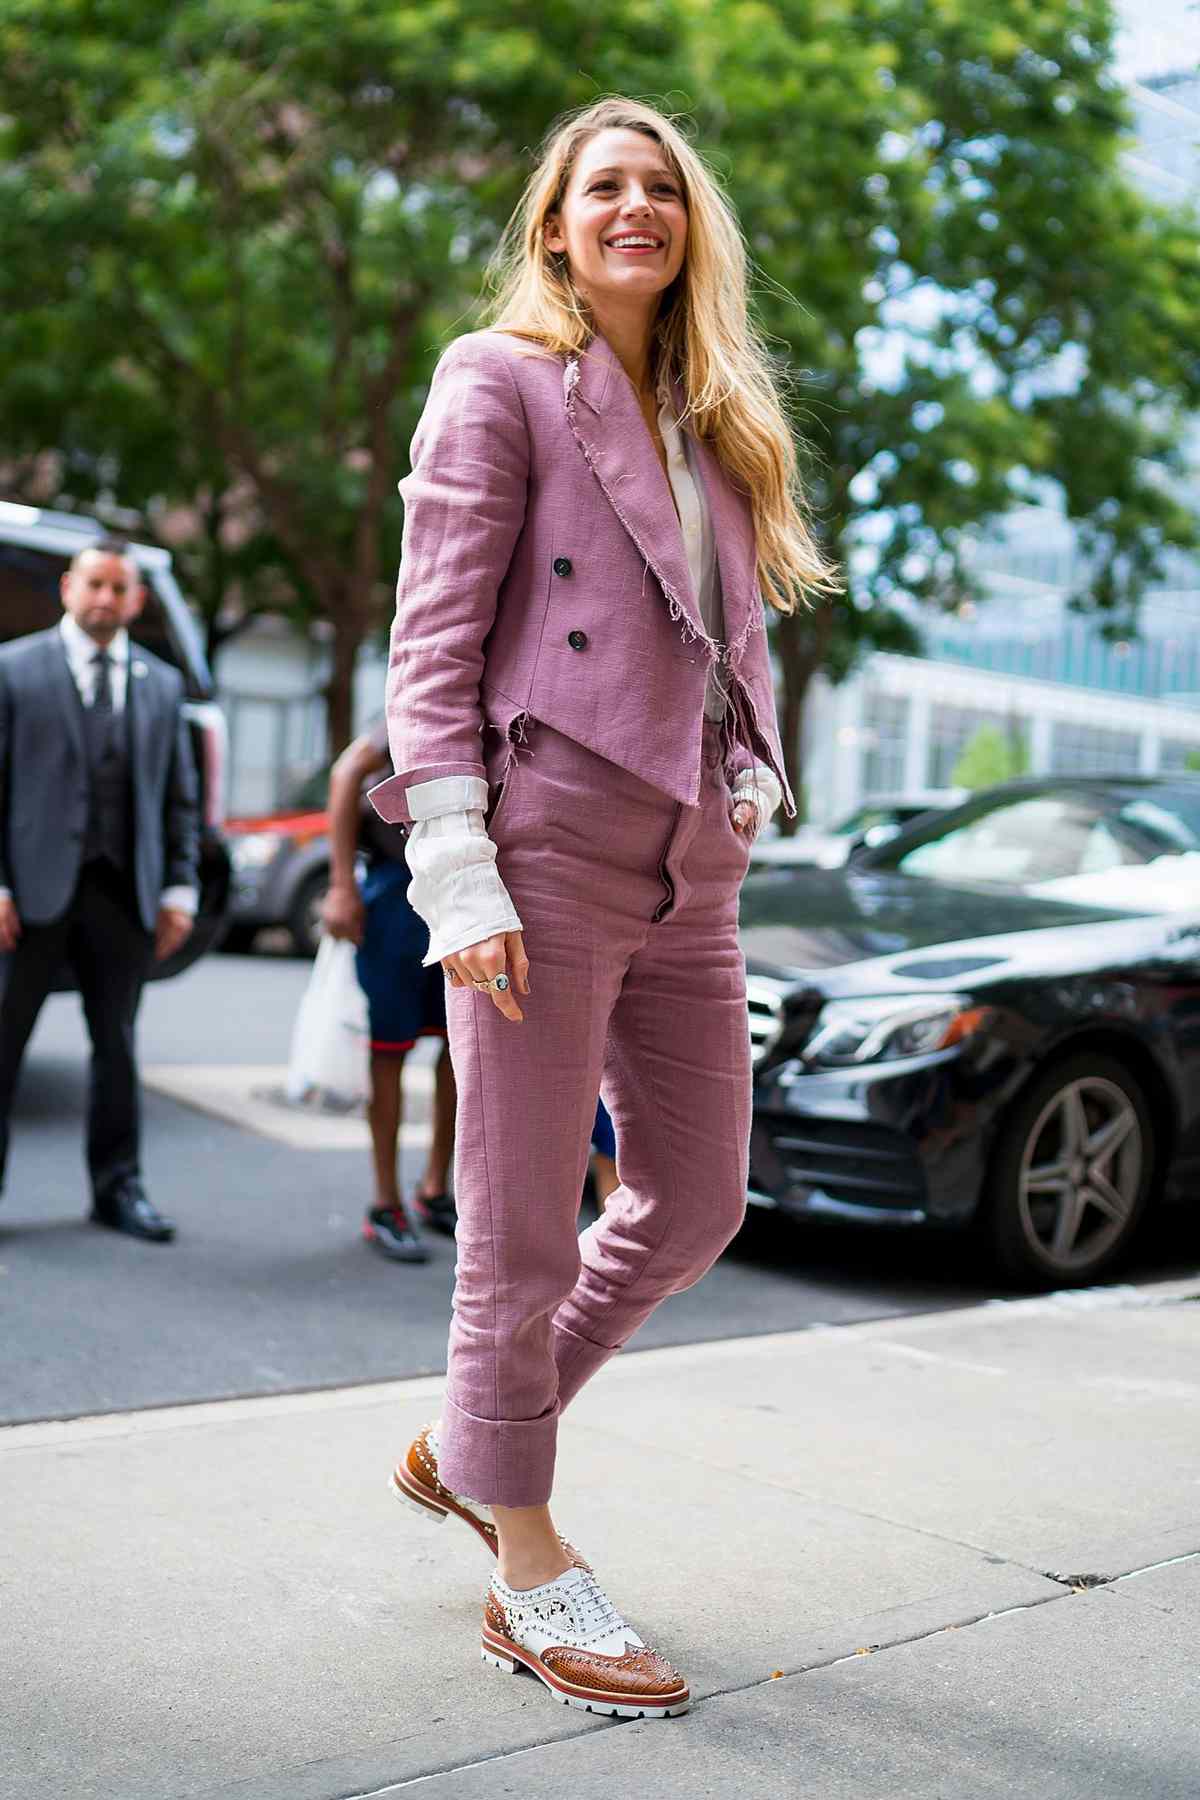 Blake Lively suits embed